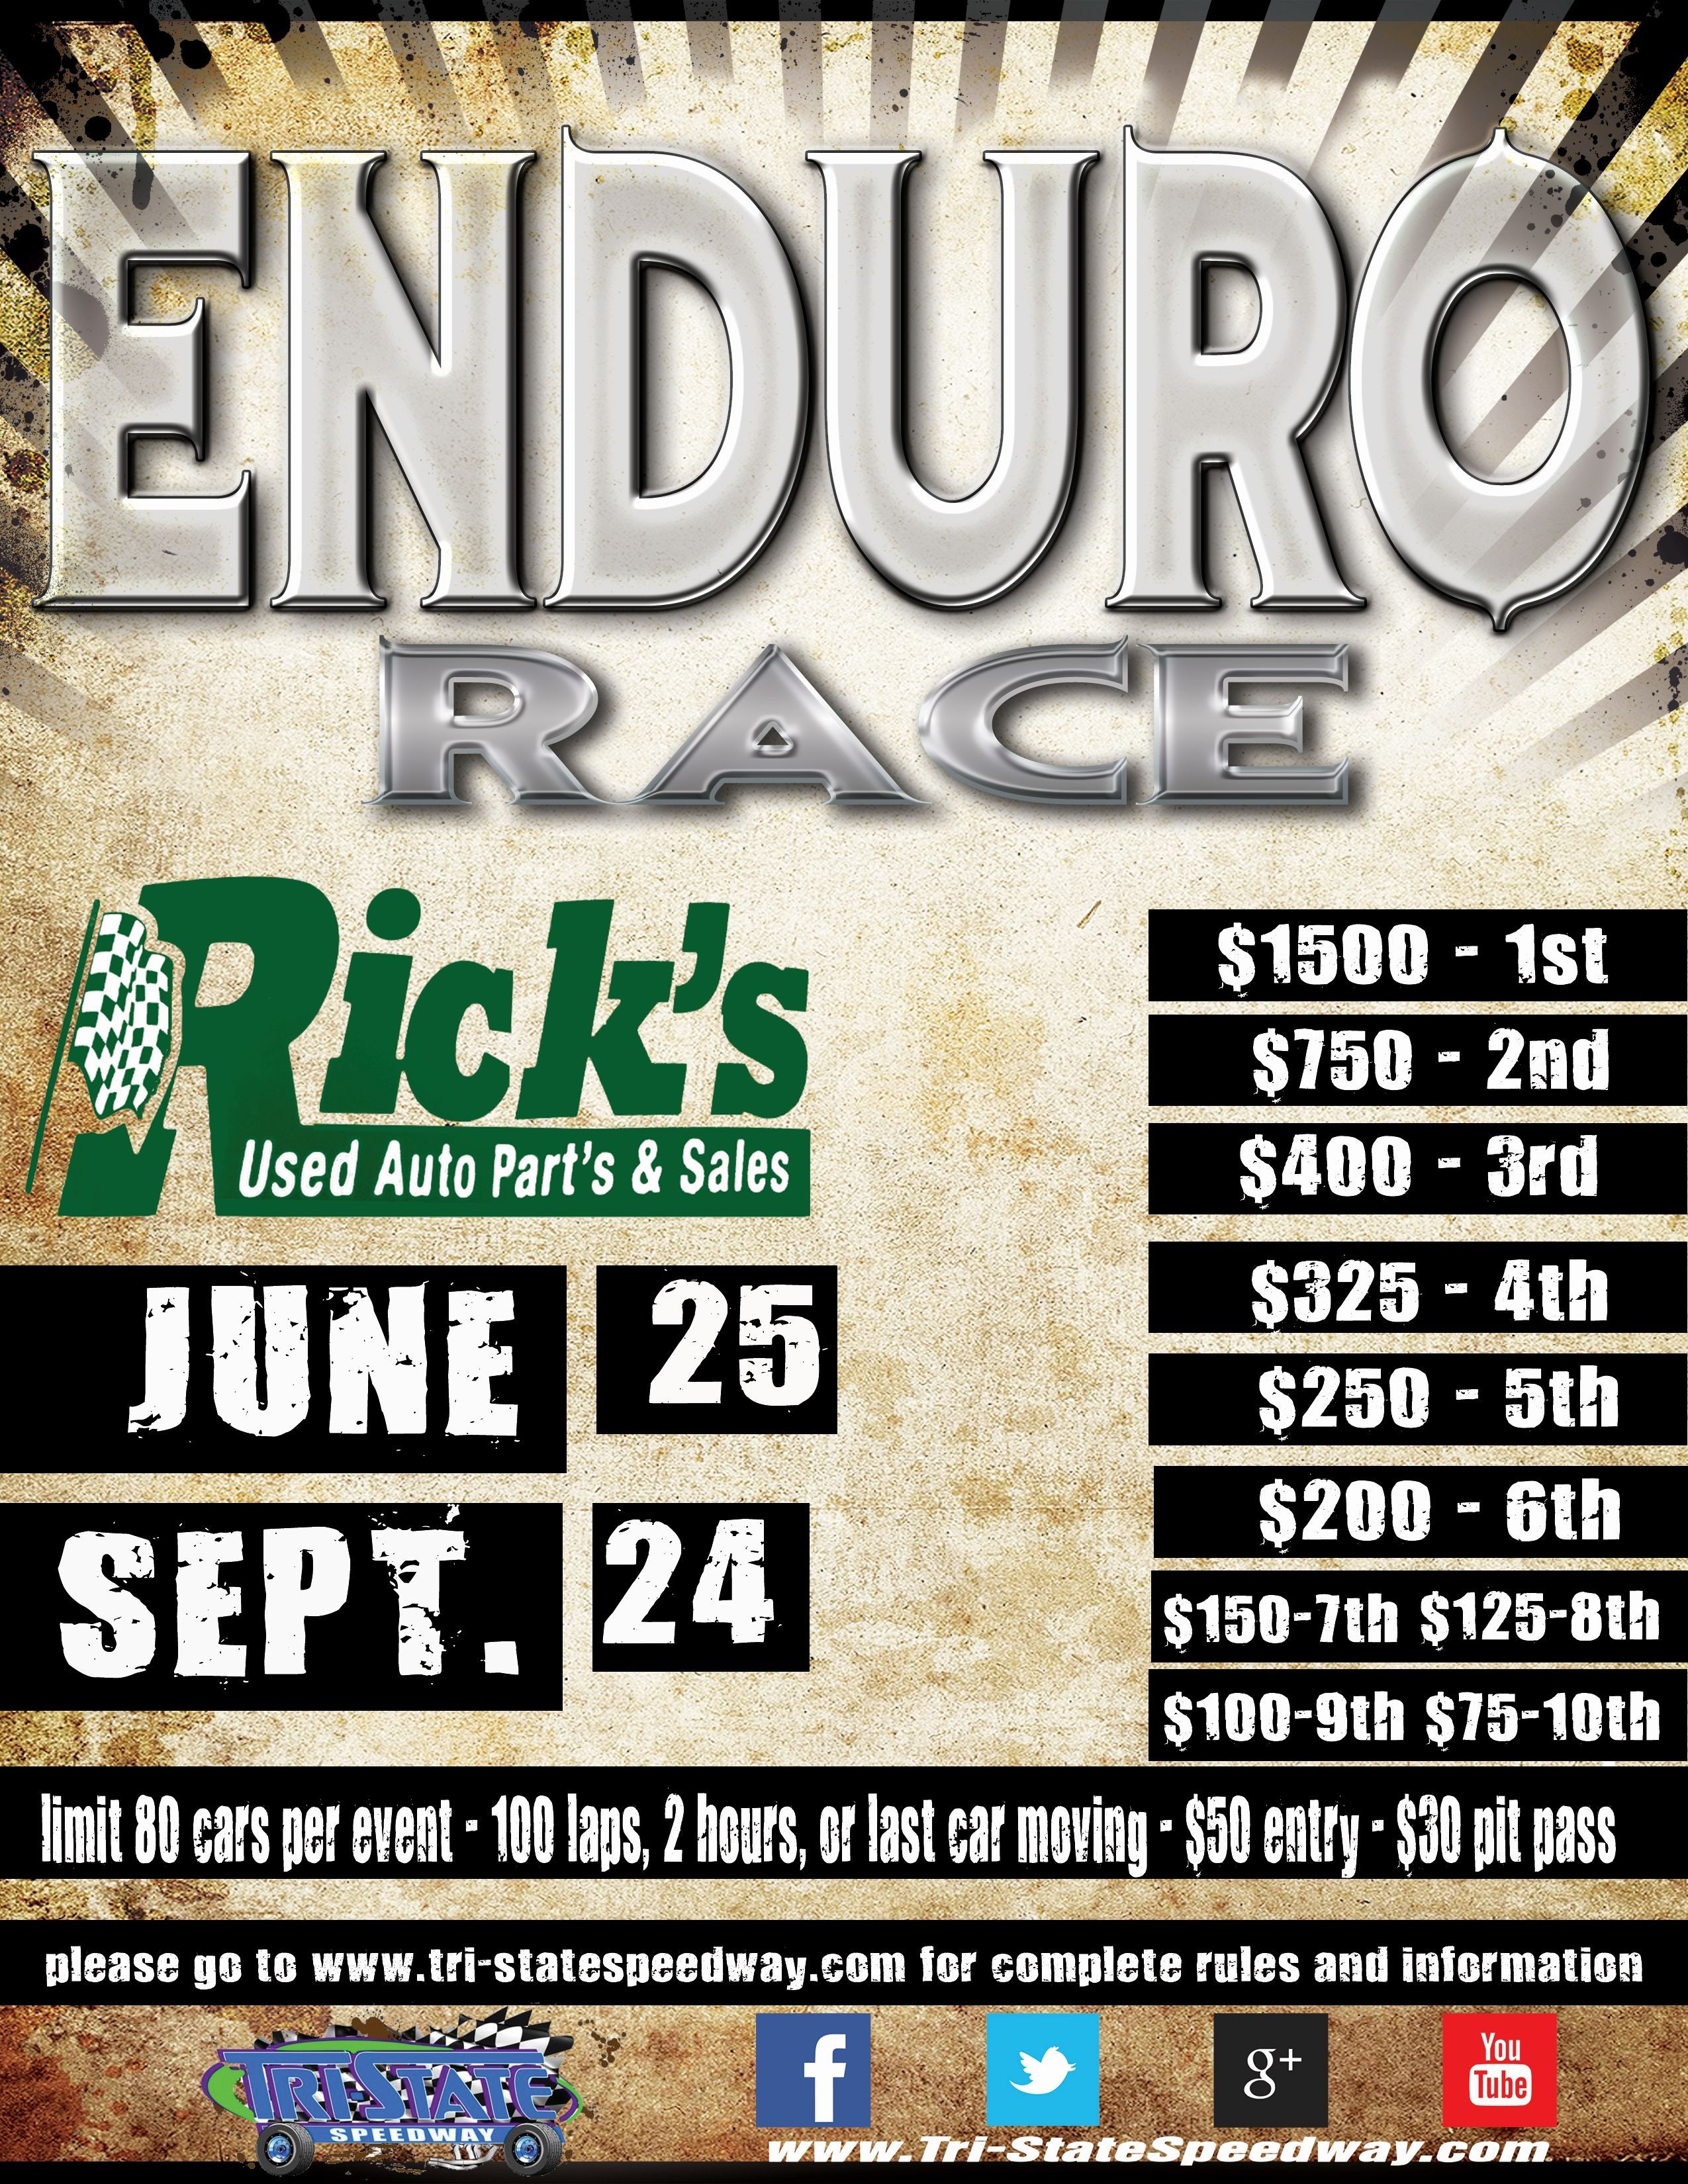 $1,500 to Win Enduro #2, 46th Annual Point Championship Races and Fan Appreciation Night